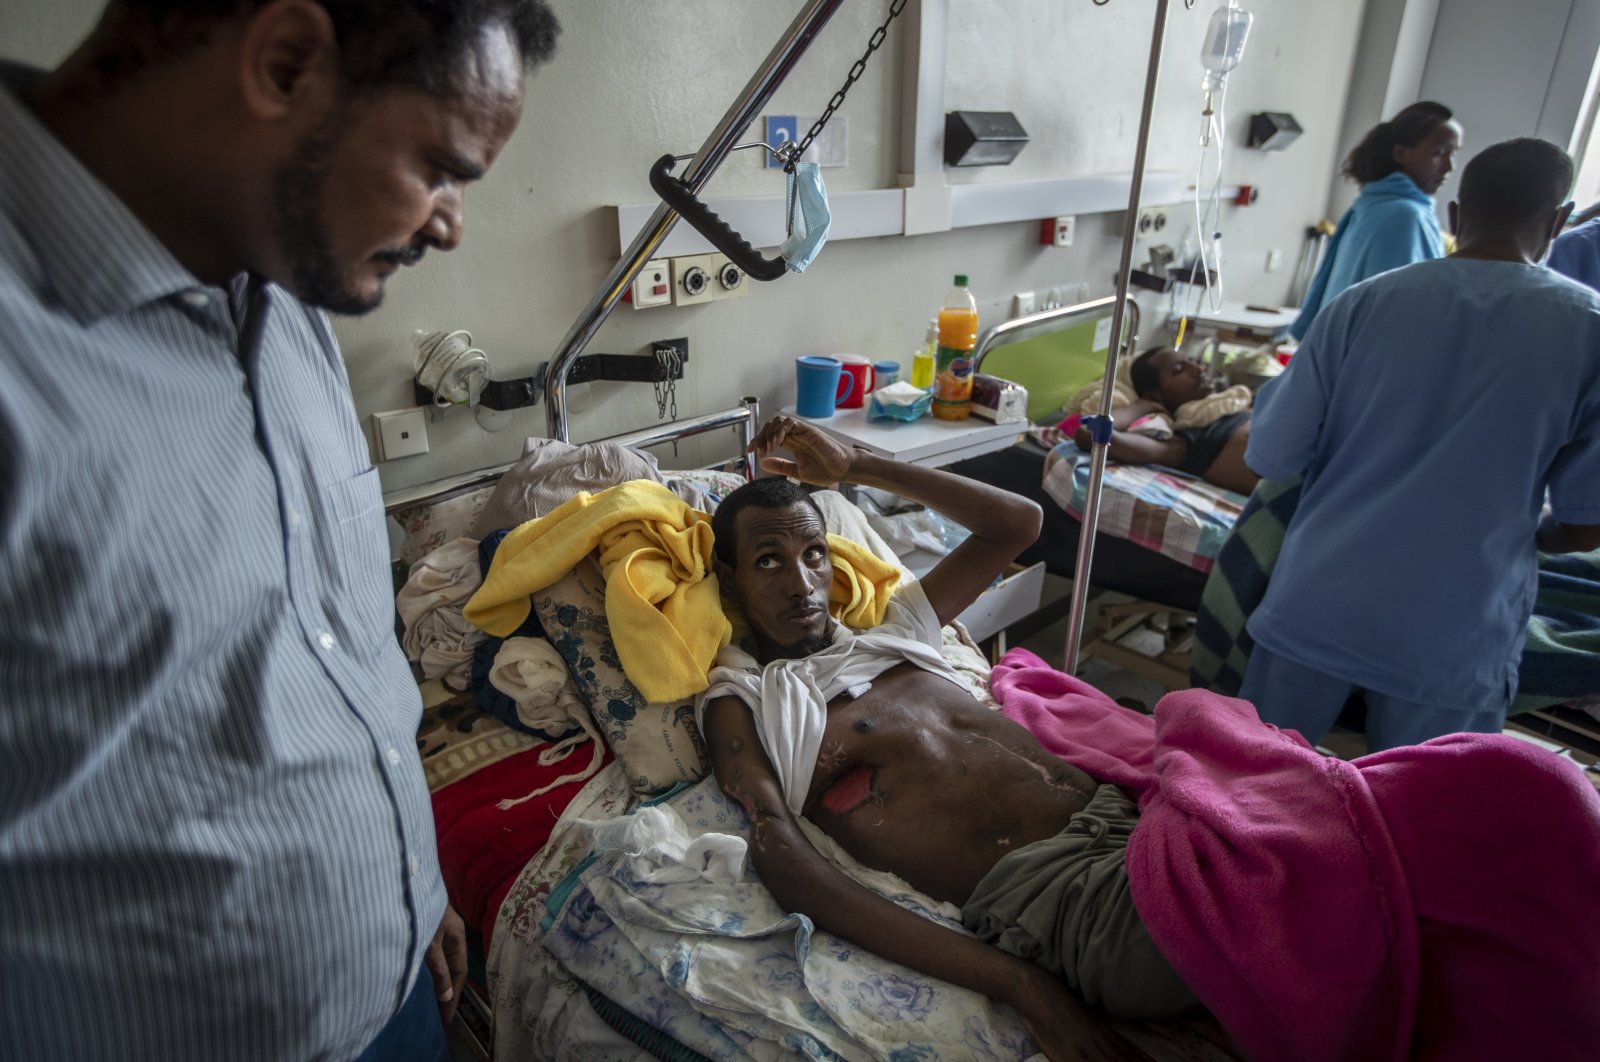 Farmer Teklemariam Gebremichael, who said he was shot by Eritrean forces in Enticho six months before and was still recovering, speaks to a doctor (L) at the Ayder Referral Hospital in Mekele, in the Tigray region of northern Ethiopia on May 6, 2021. (AP Photo)